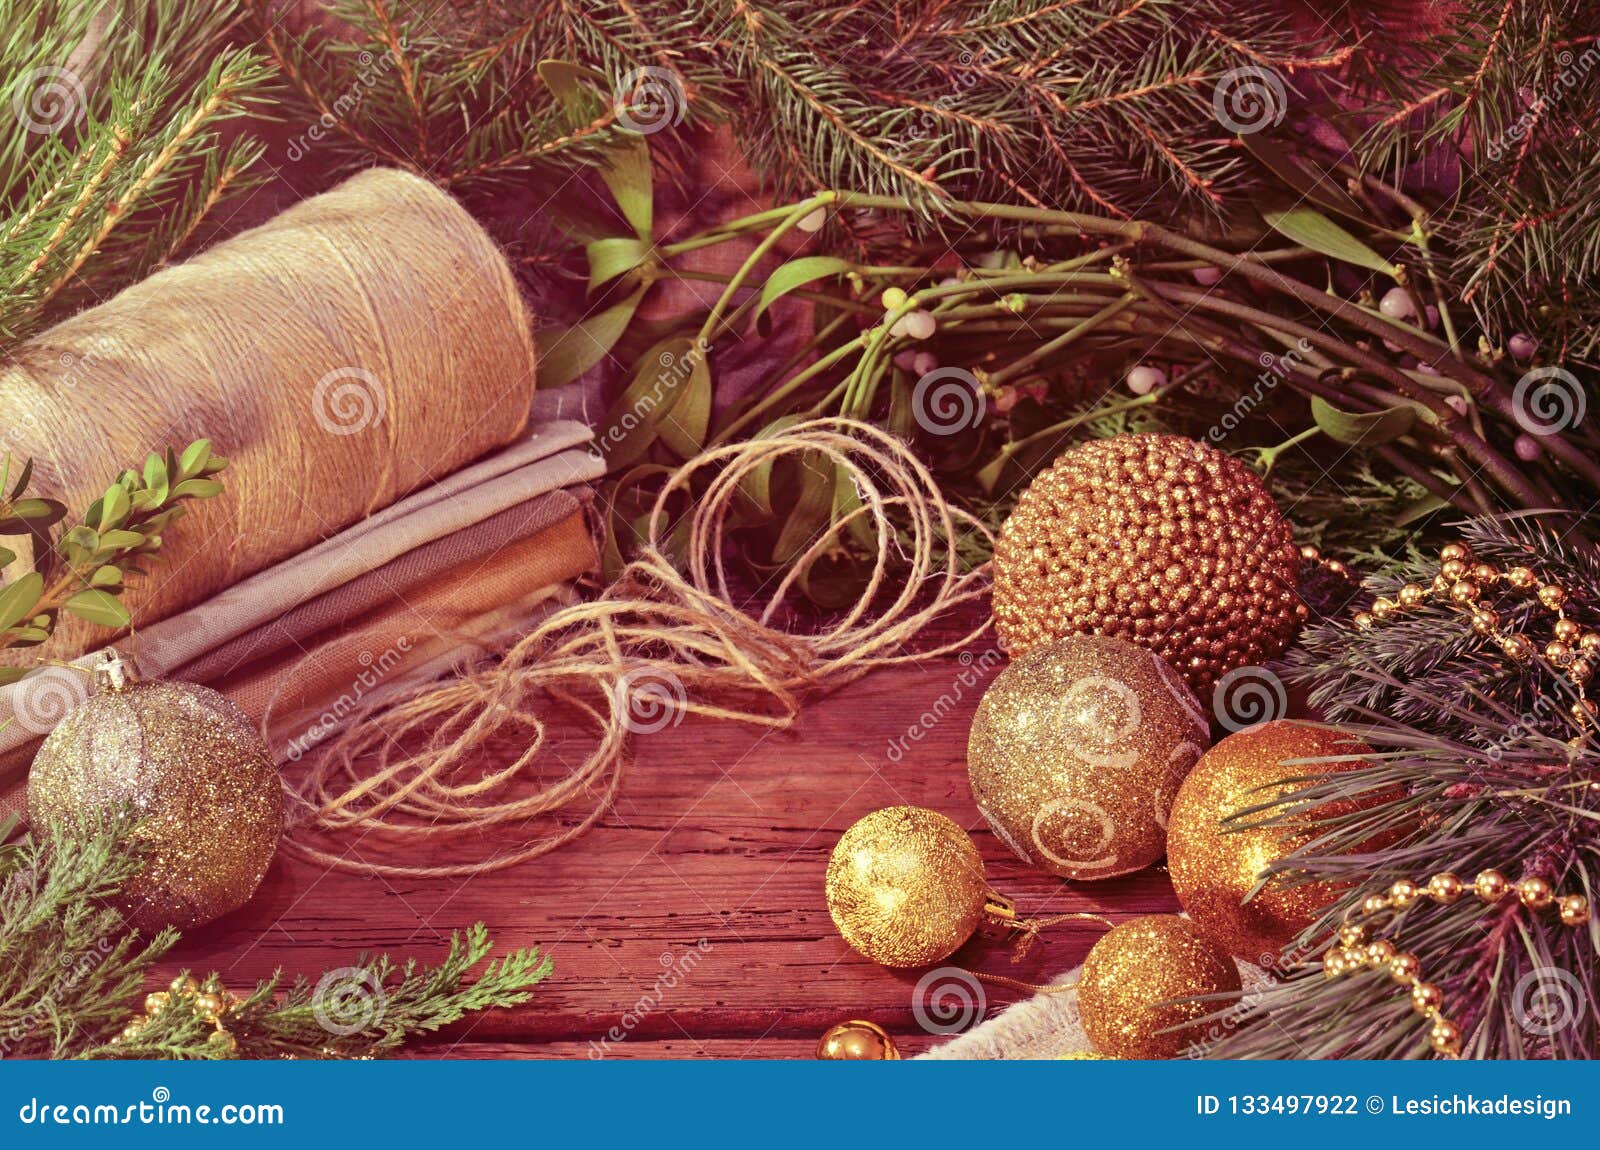 Christmas or New Yew Ideas with Decoration Rope and Sackcloth Stock Photo -  Image of branch, paper: 133497922